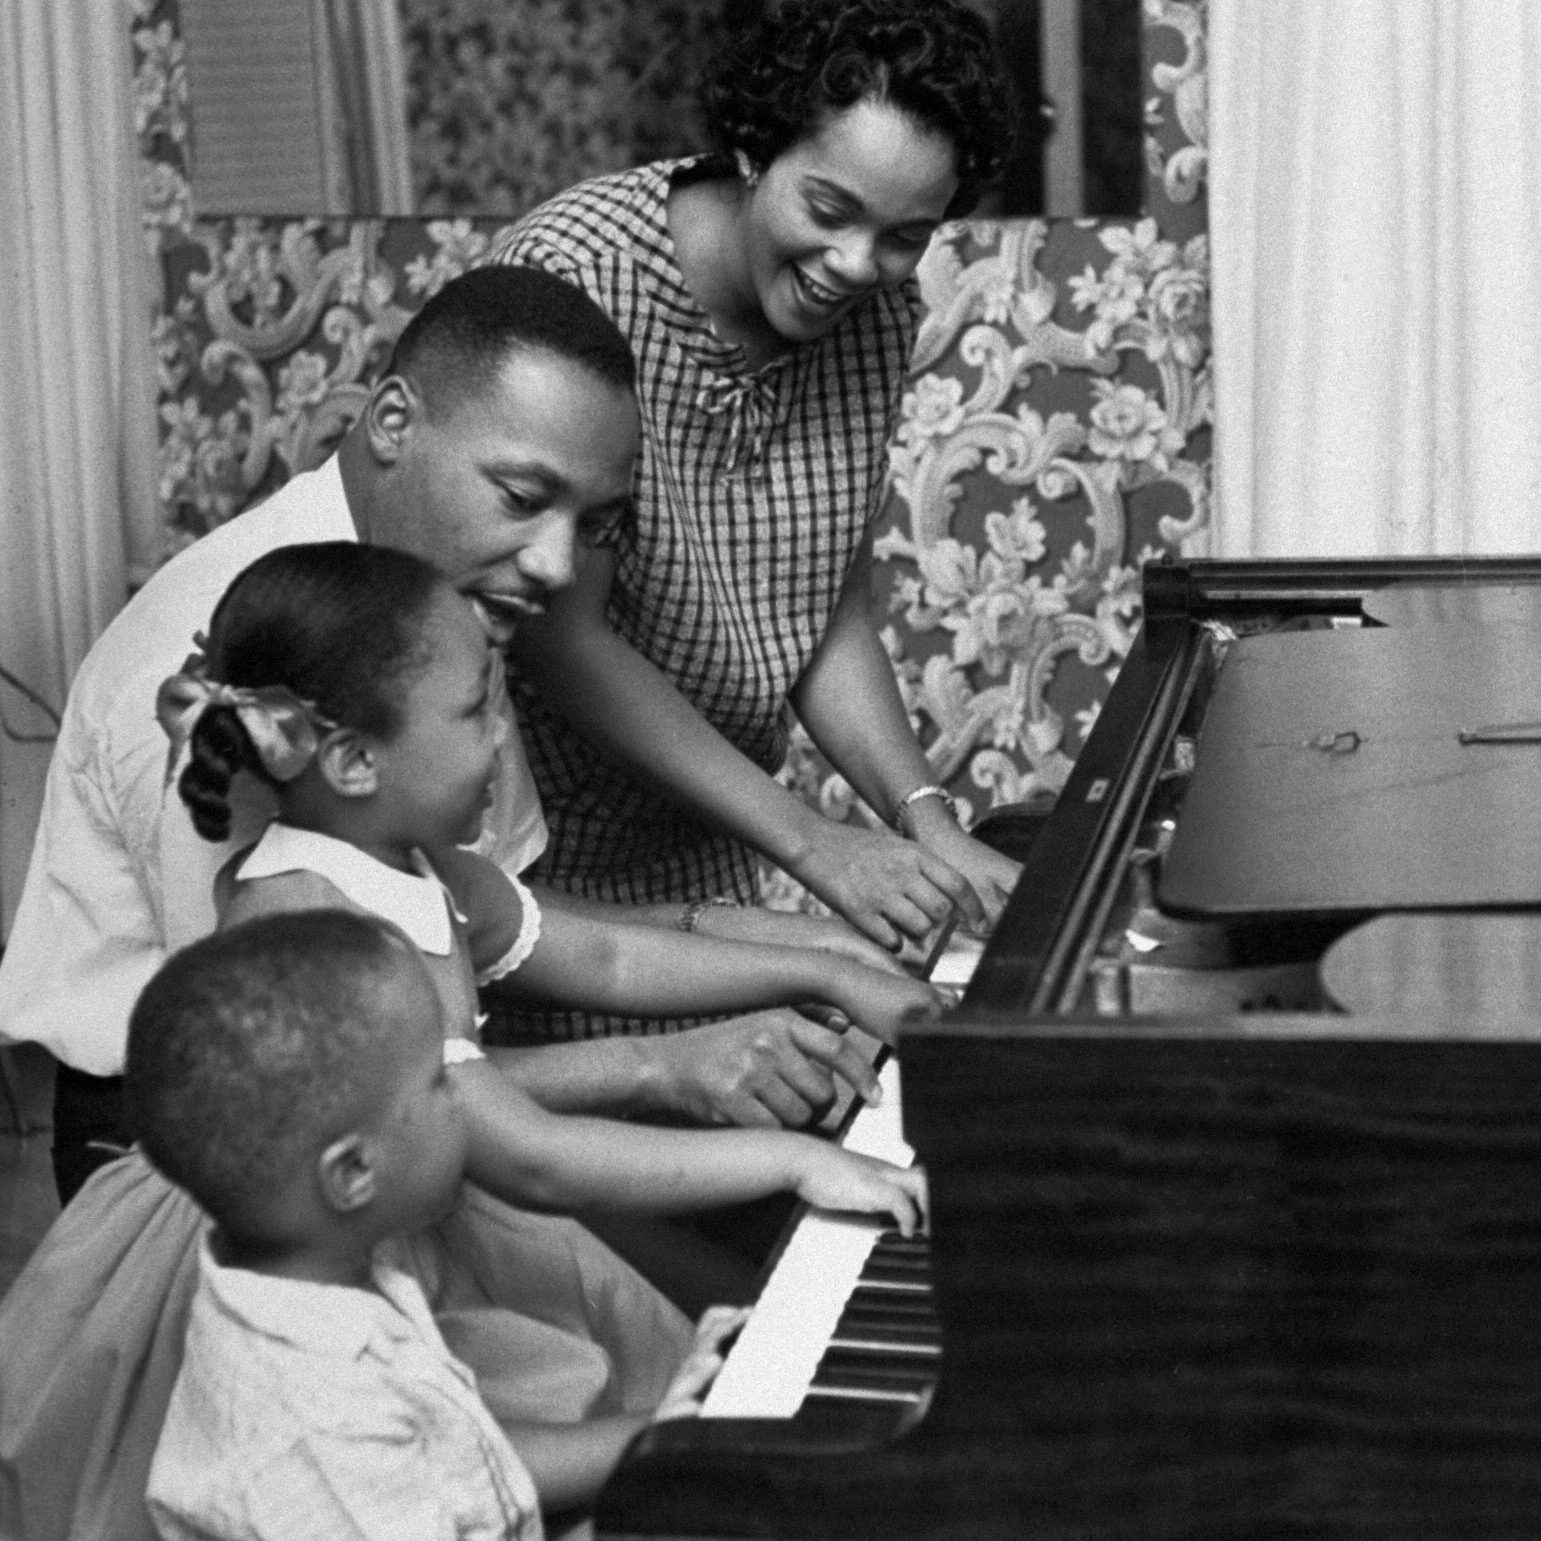 Civil Rights activist Rev Dr. Martin Luther King Jr. and his wife Coretta, daughter Yolanda, 5, and Martin Luther III, 3, sitting together as they play piano